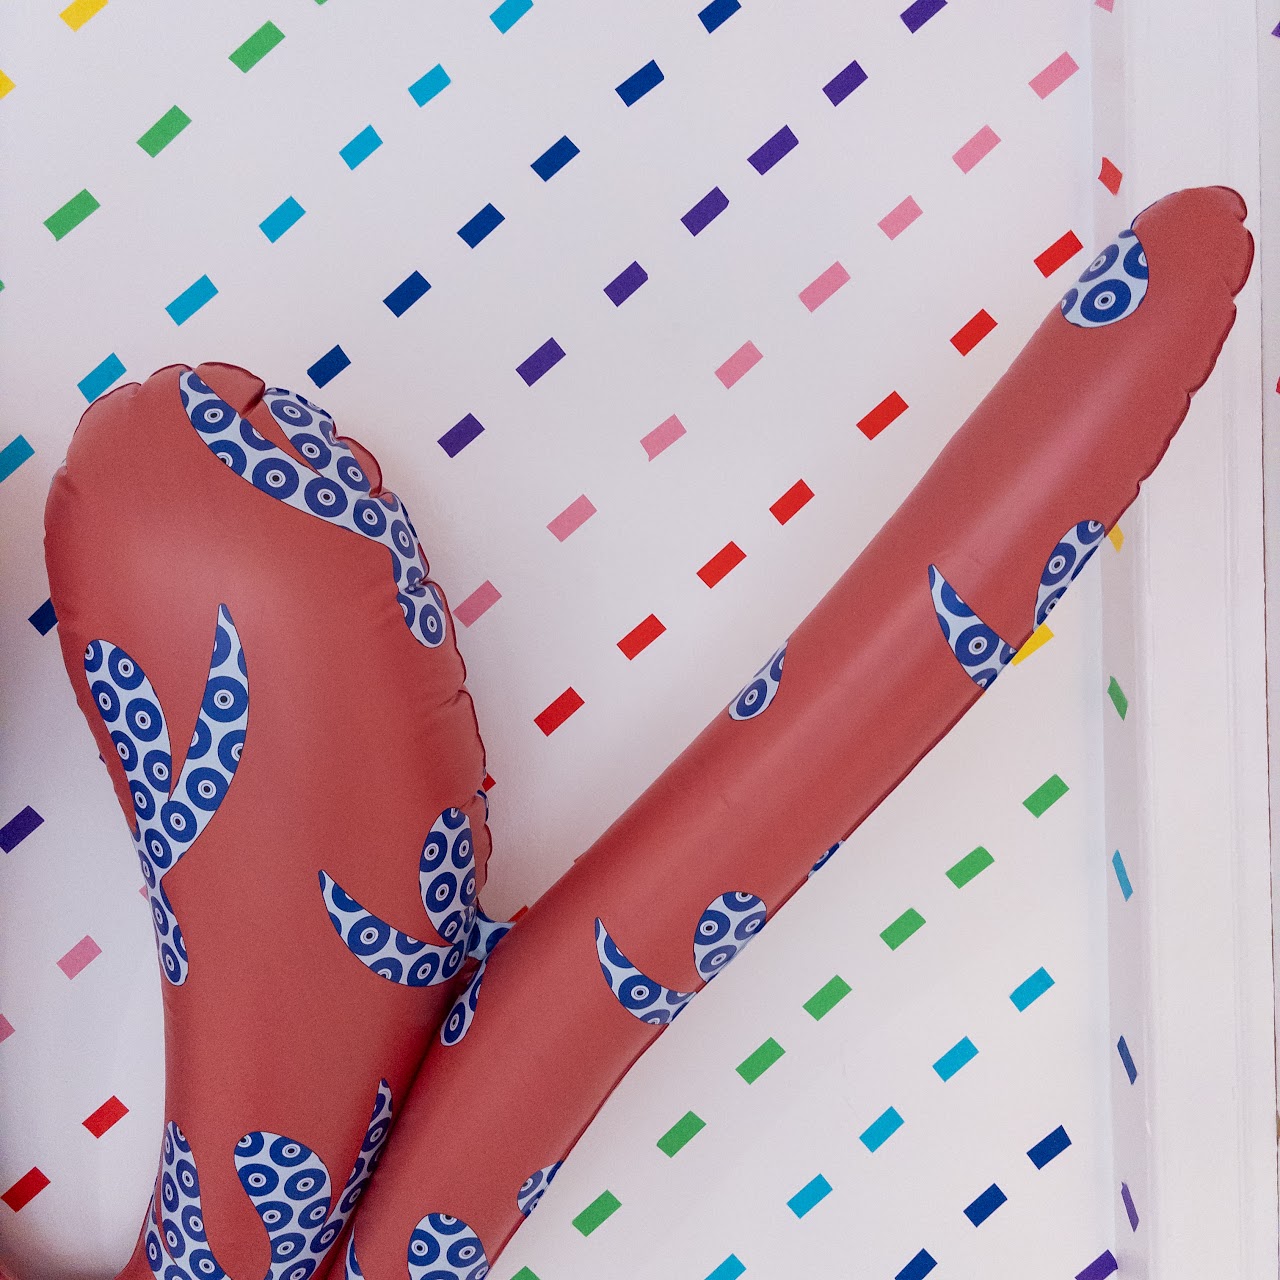 Sophia Wallace 'Evil Eye' Signed Inflatable Clitoris Sculpture #1